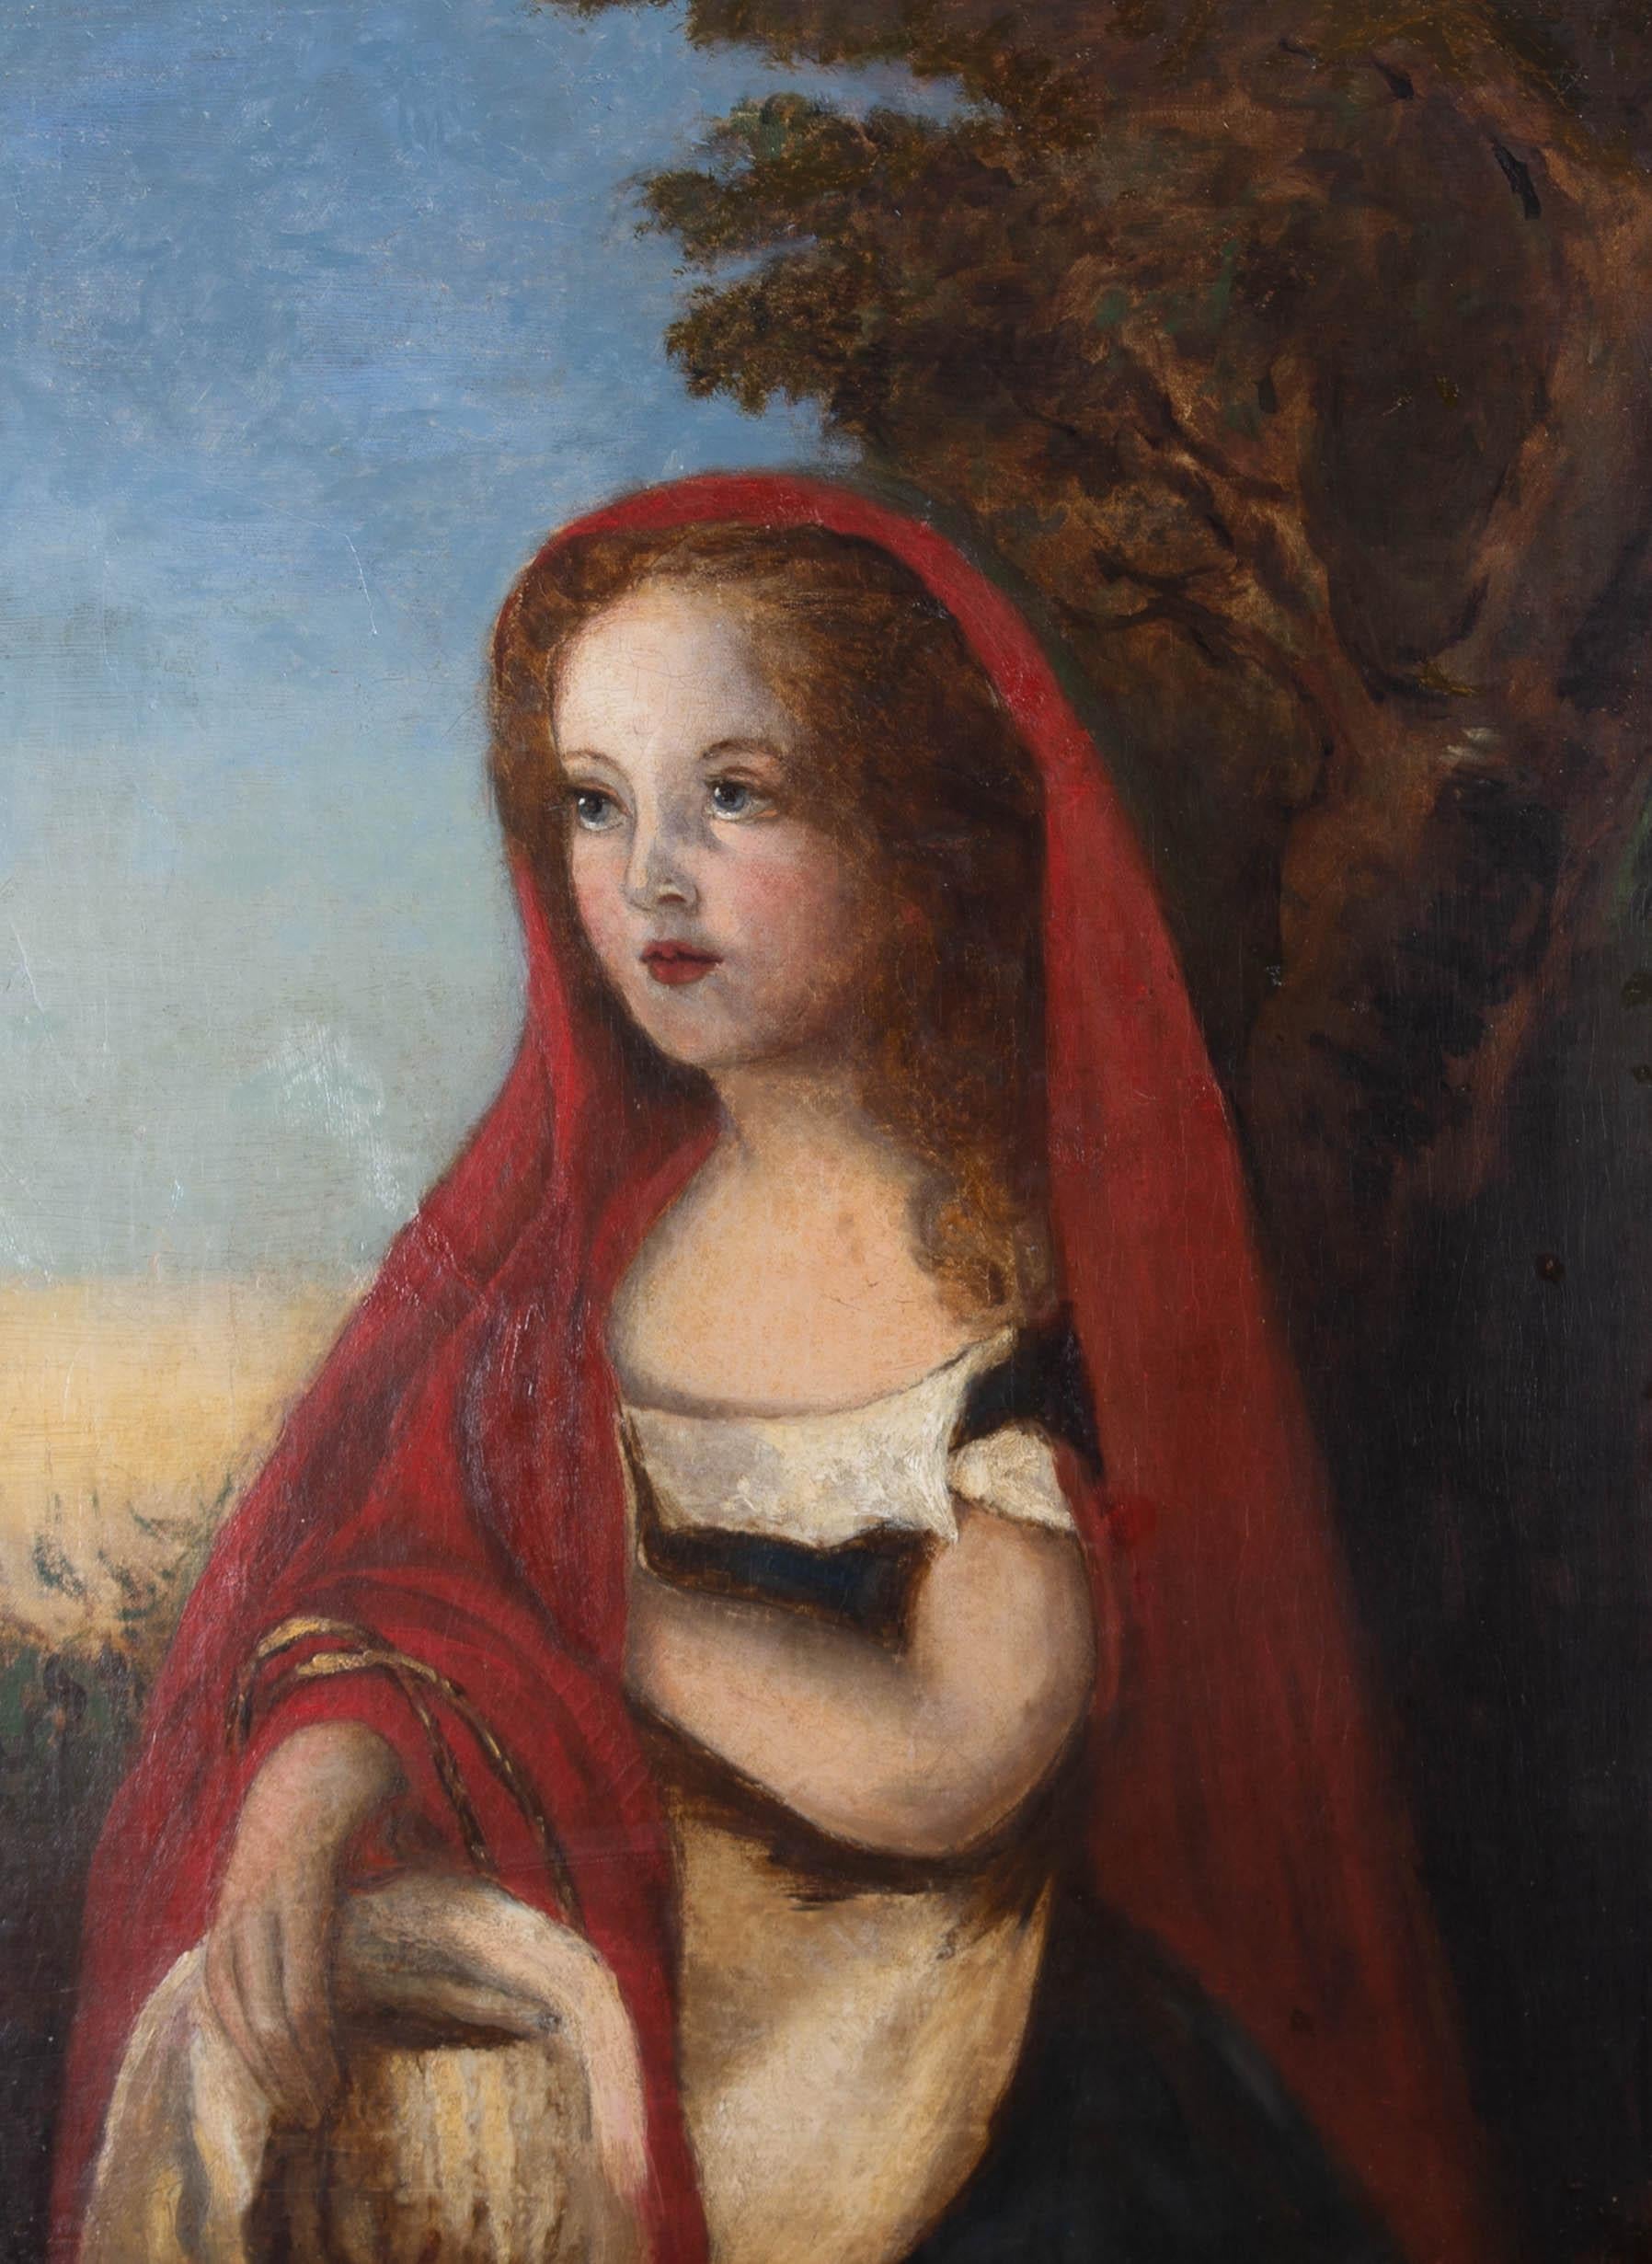 A charming mid 19th Century portrait of a pretty young girl with rosy cheeks, wearing a read cloak, carrying a basket as she looks off into the distance with a delicate smile. The painting is unsigned and presented in a contemporary frame. The